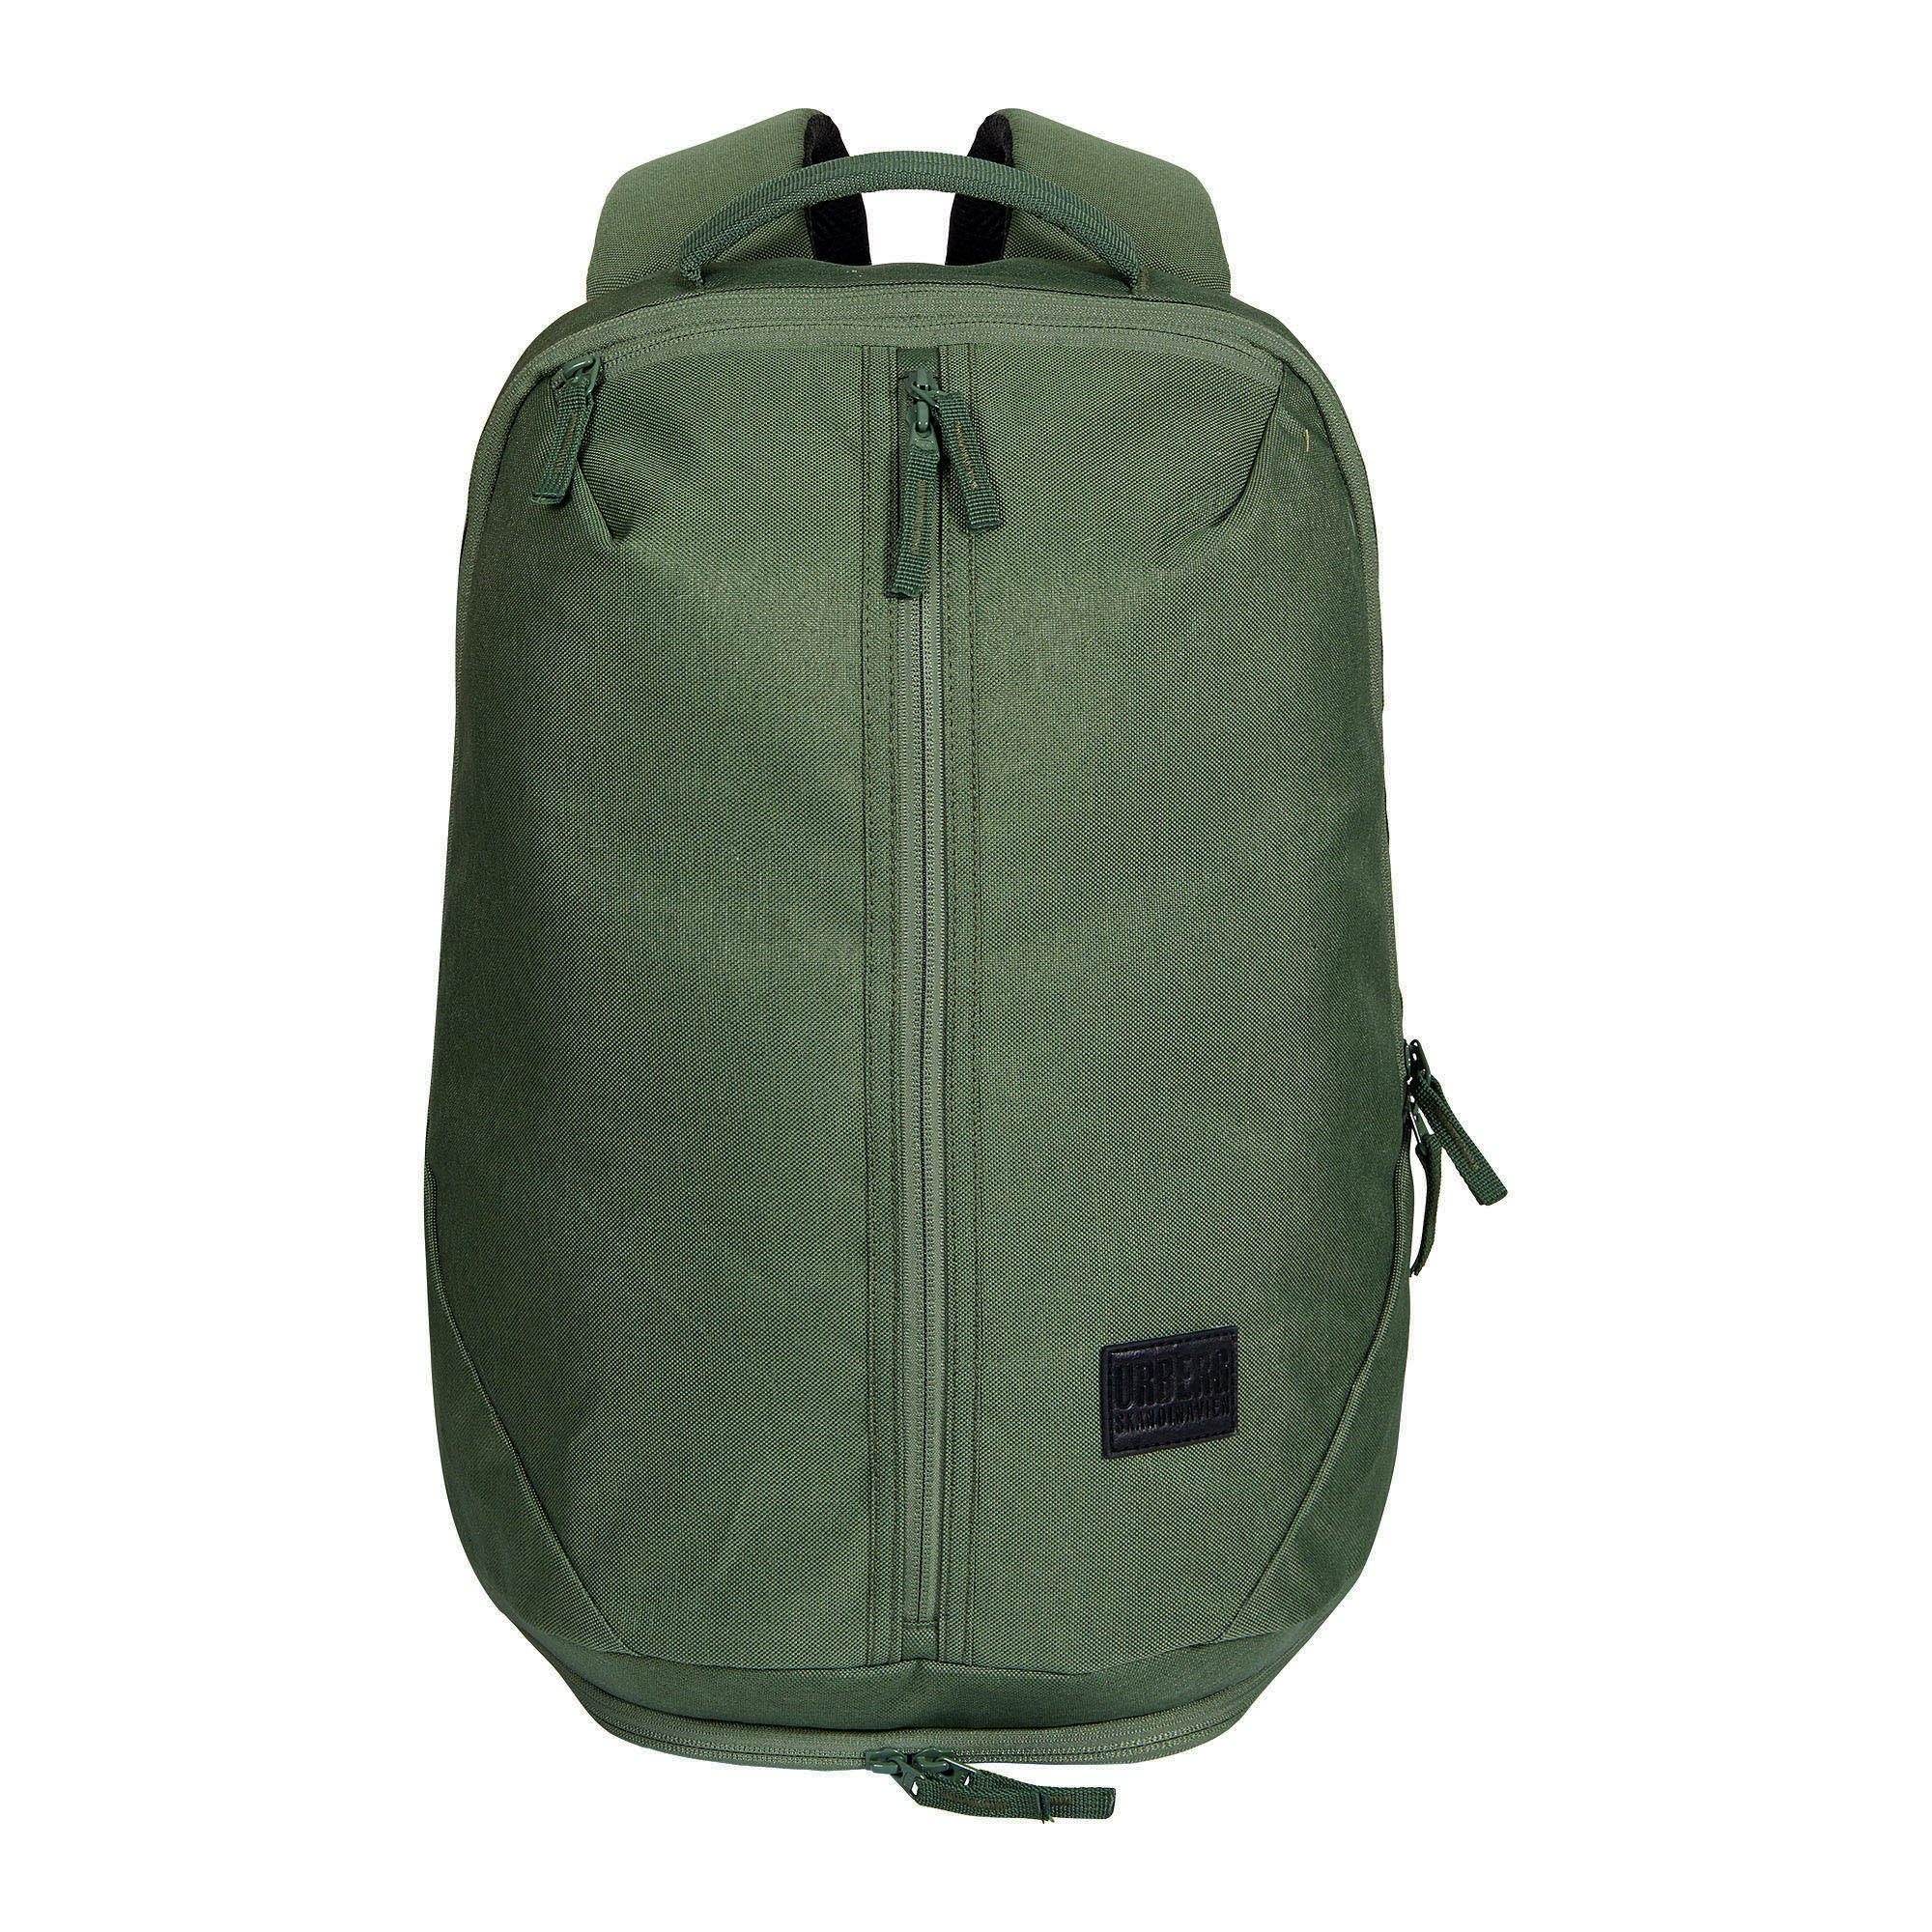 Buy Urberg Rubine Urban Backpack 2.0 from Outnorth